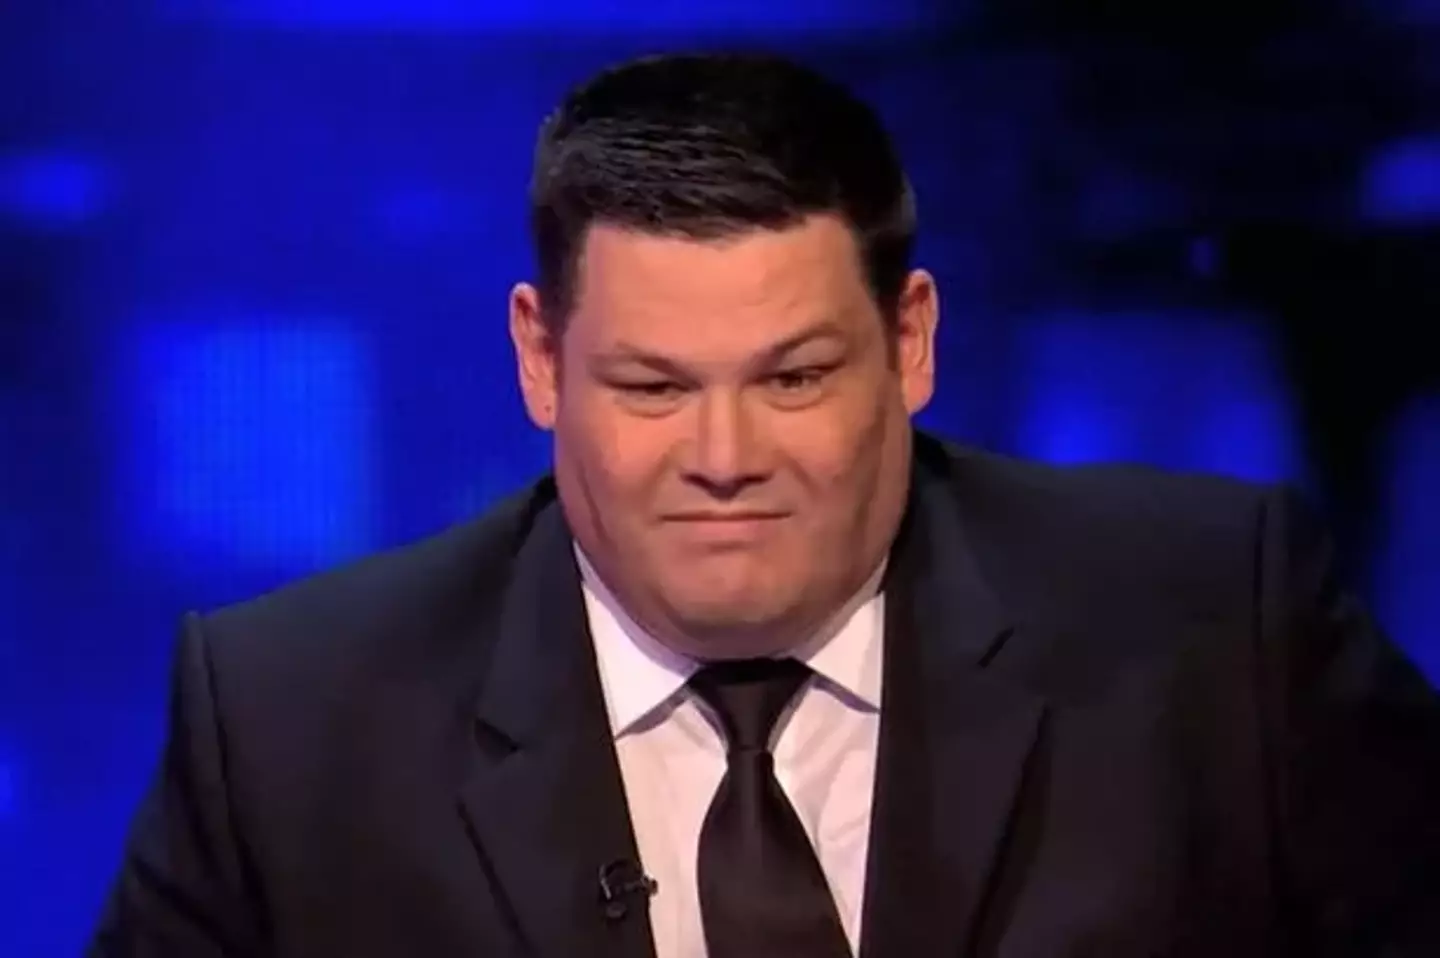 Mark 'The Beast' Labbett is better known for his work on The Chase.